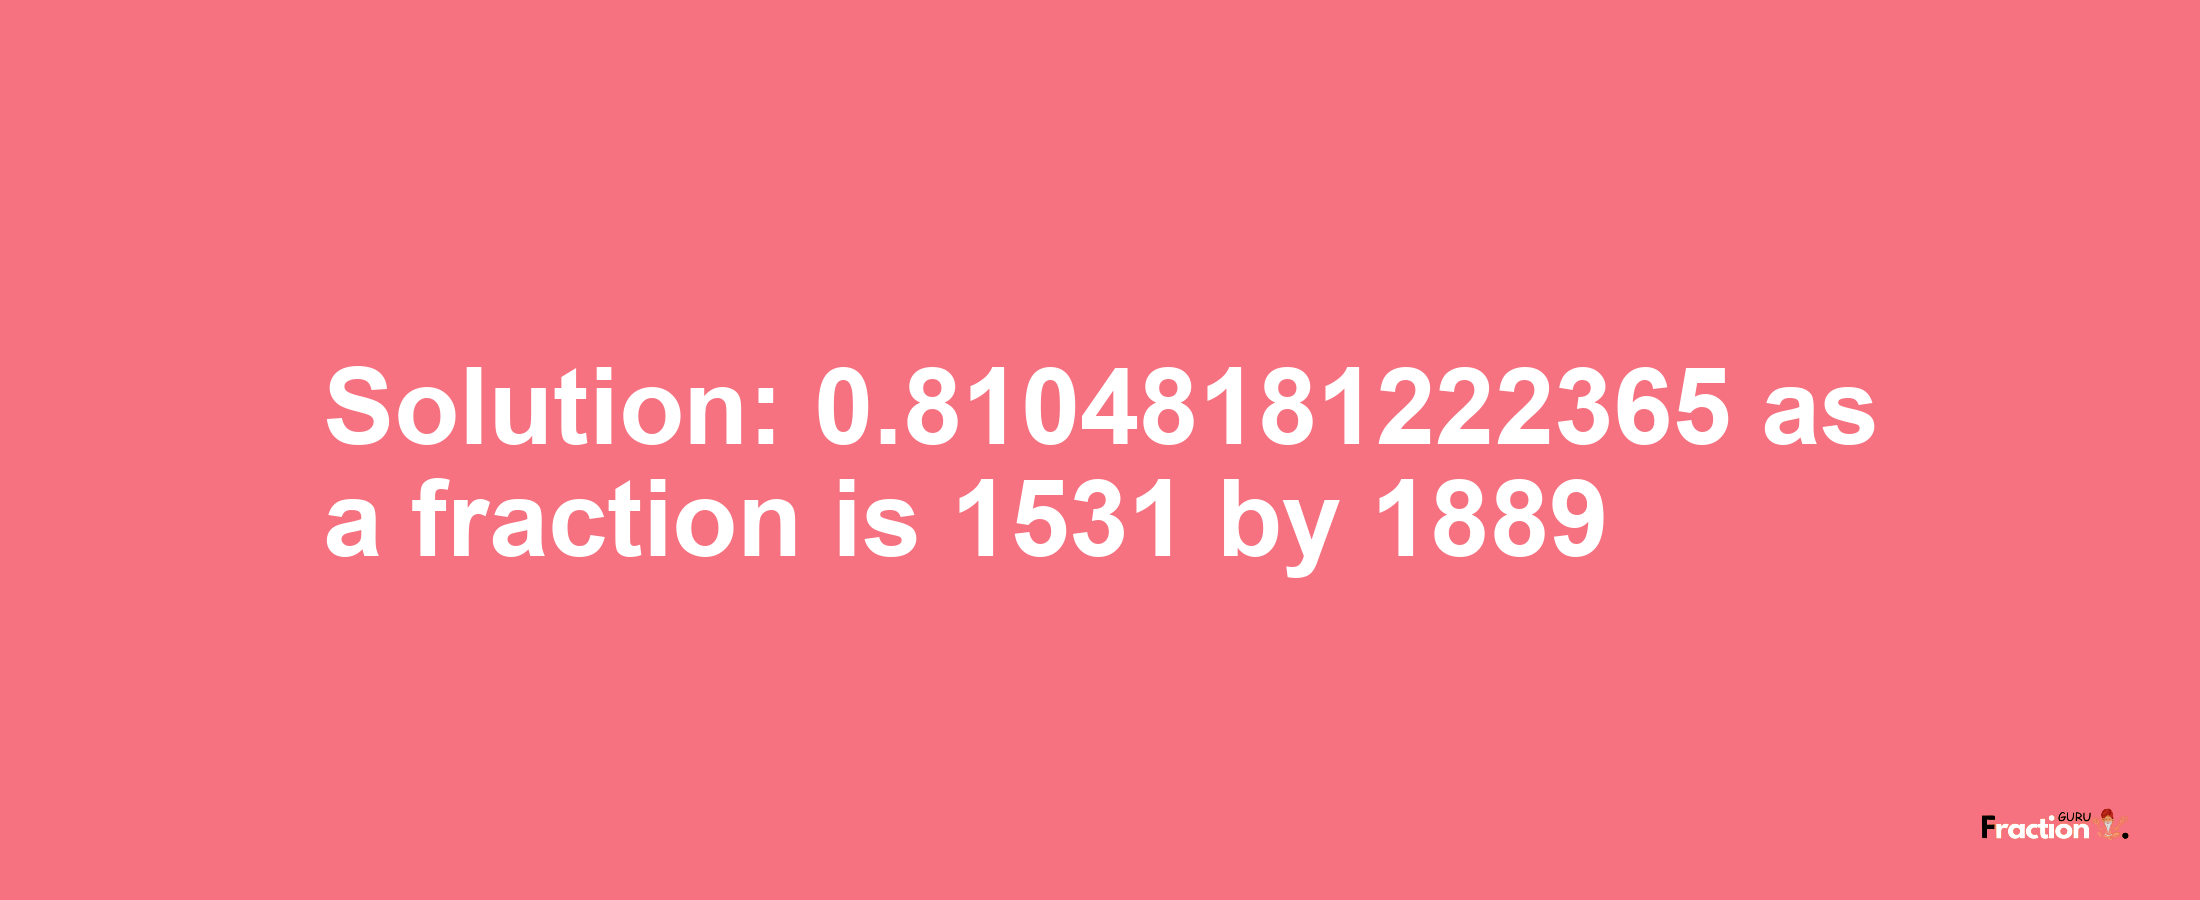 Solution:0.81048181222365 as a fraction is 1531/1889